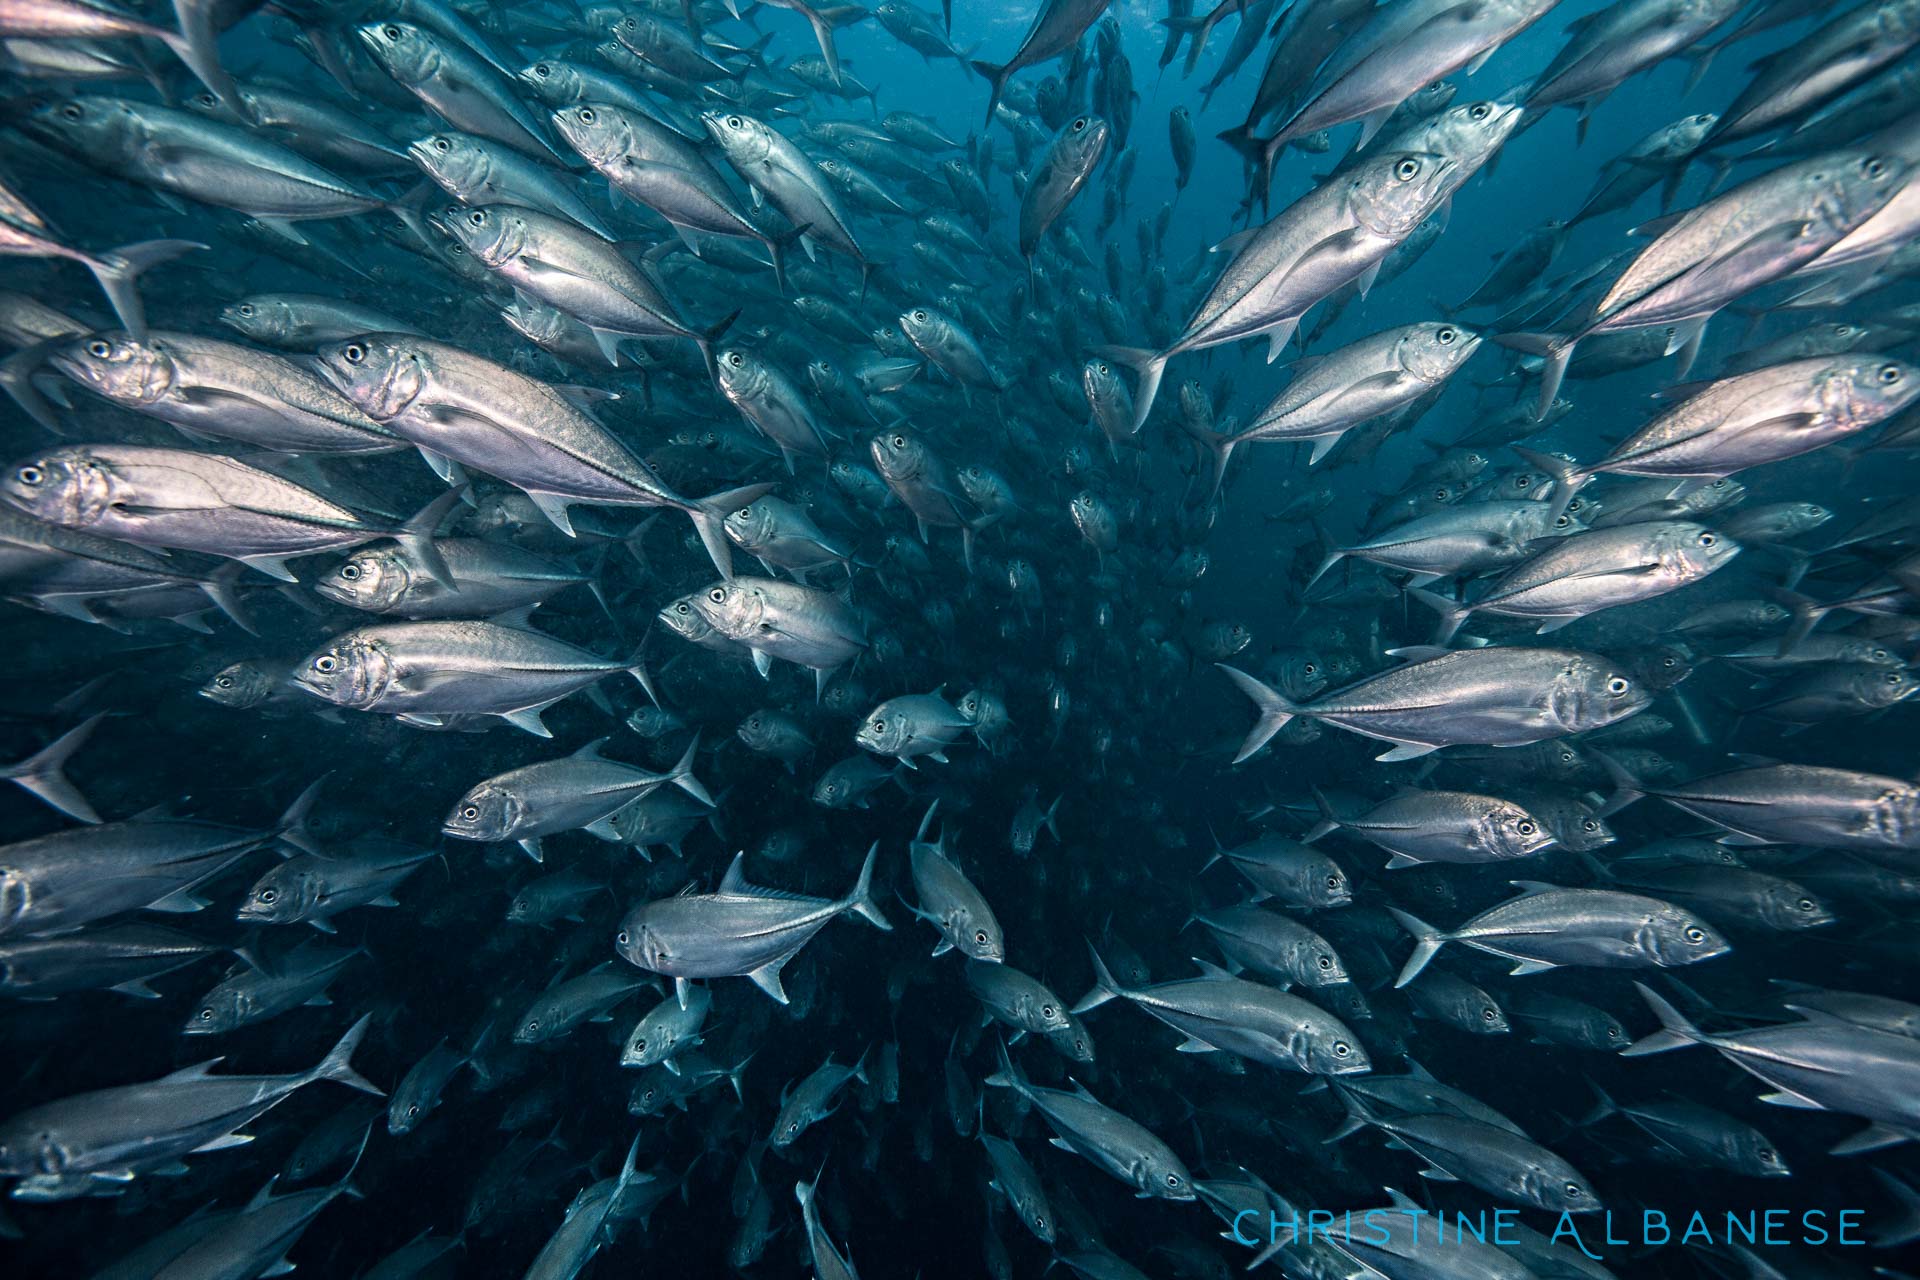 The middle of a massive school fish is one of my favourite places to be! There is no feeling quite like being completely and utterly enveloped by thousands of silvery busy-bodies. ❤️ a school of big-eye travelly has been at Sailrock for years now... I always go looking for them. 

#underwater #underwaterdiving #underwaterphotography #ds160 #ikelite #canon6d #trevally #schooloffish #sailrock #kohtao #thailand #scuba #scubadiving #freedom #surrounded #countless #happiness #deepblue #padi